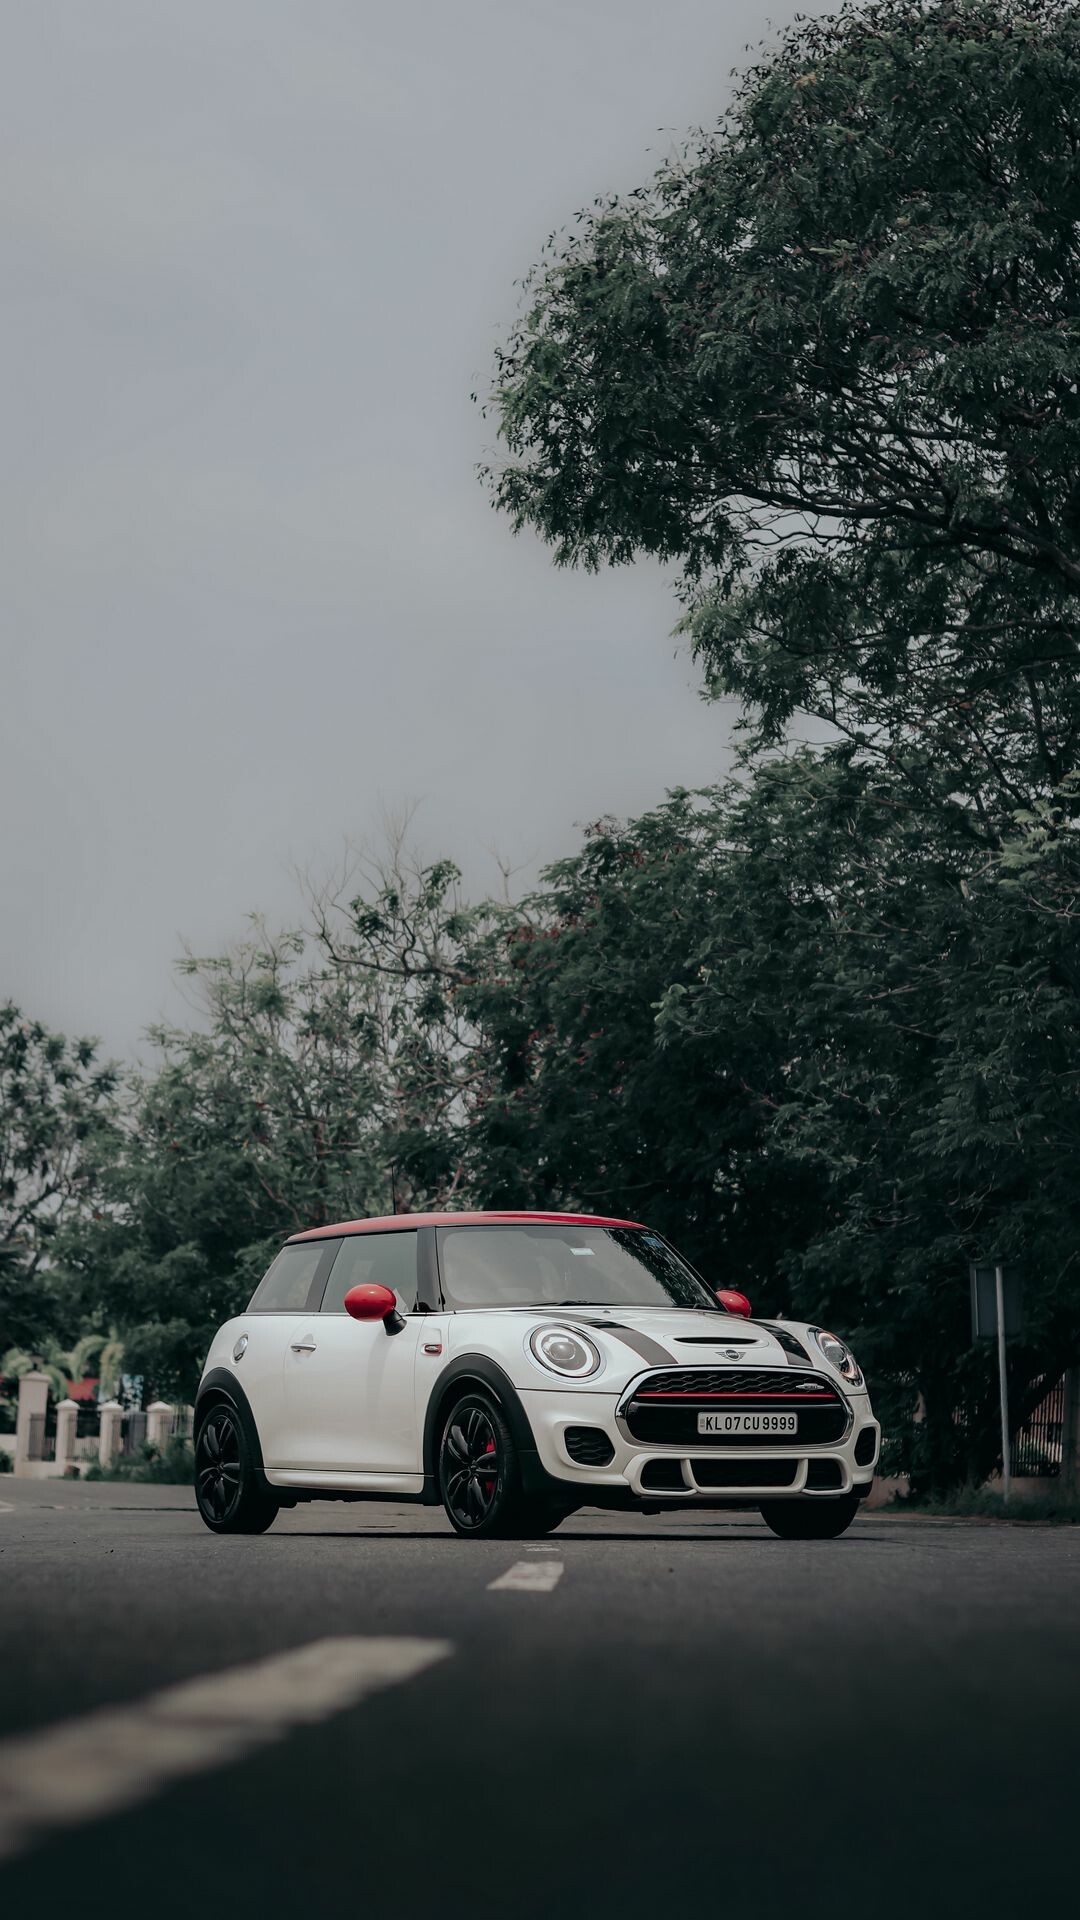 MINI Cooper: Originally, a line of British small cars manufactured by the British Motor Corporation. 1080x1920 Full HD Background.